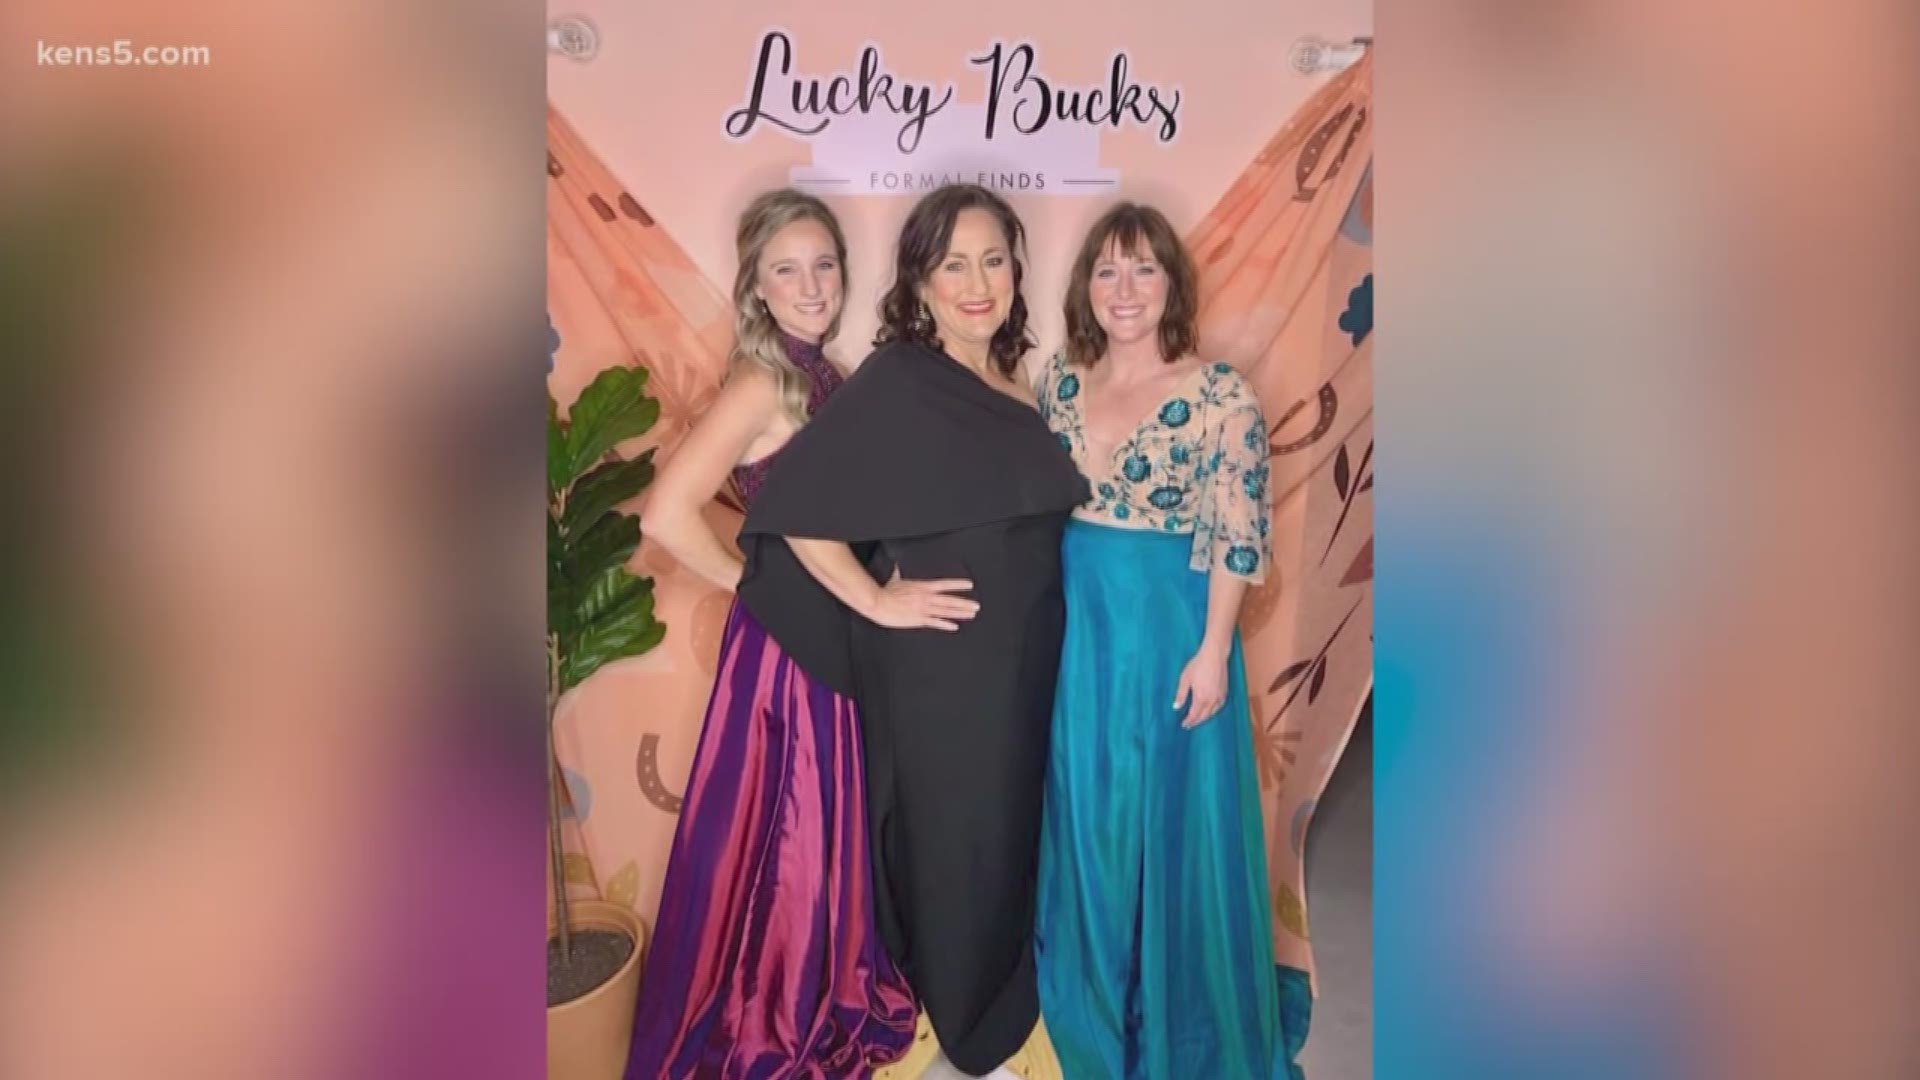 With the world as we know it on pause, the women of Lucky Bucks got creative. They’ll be hosting a virtual prom on Saturday.